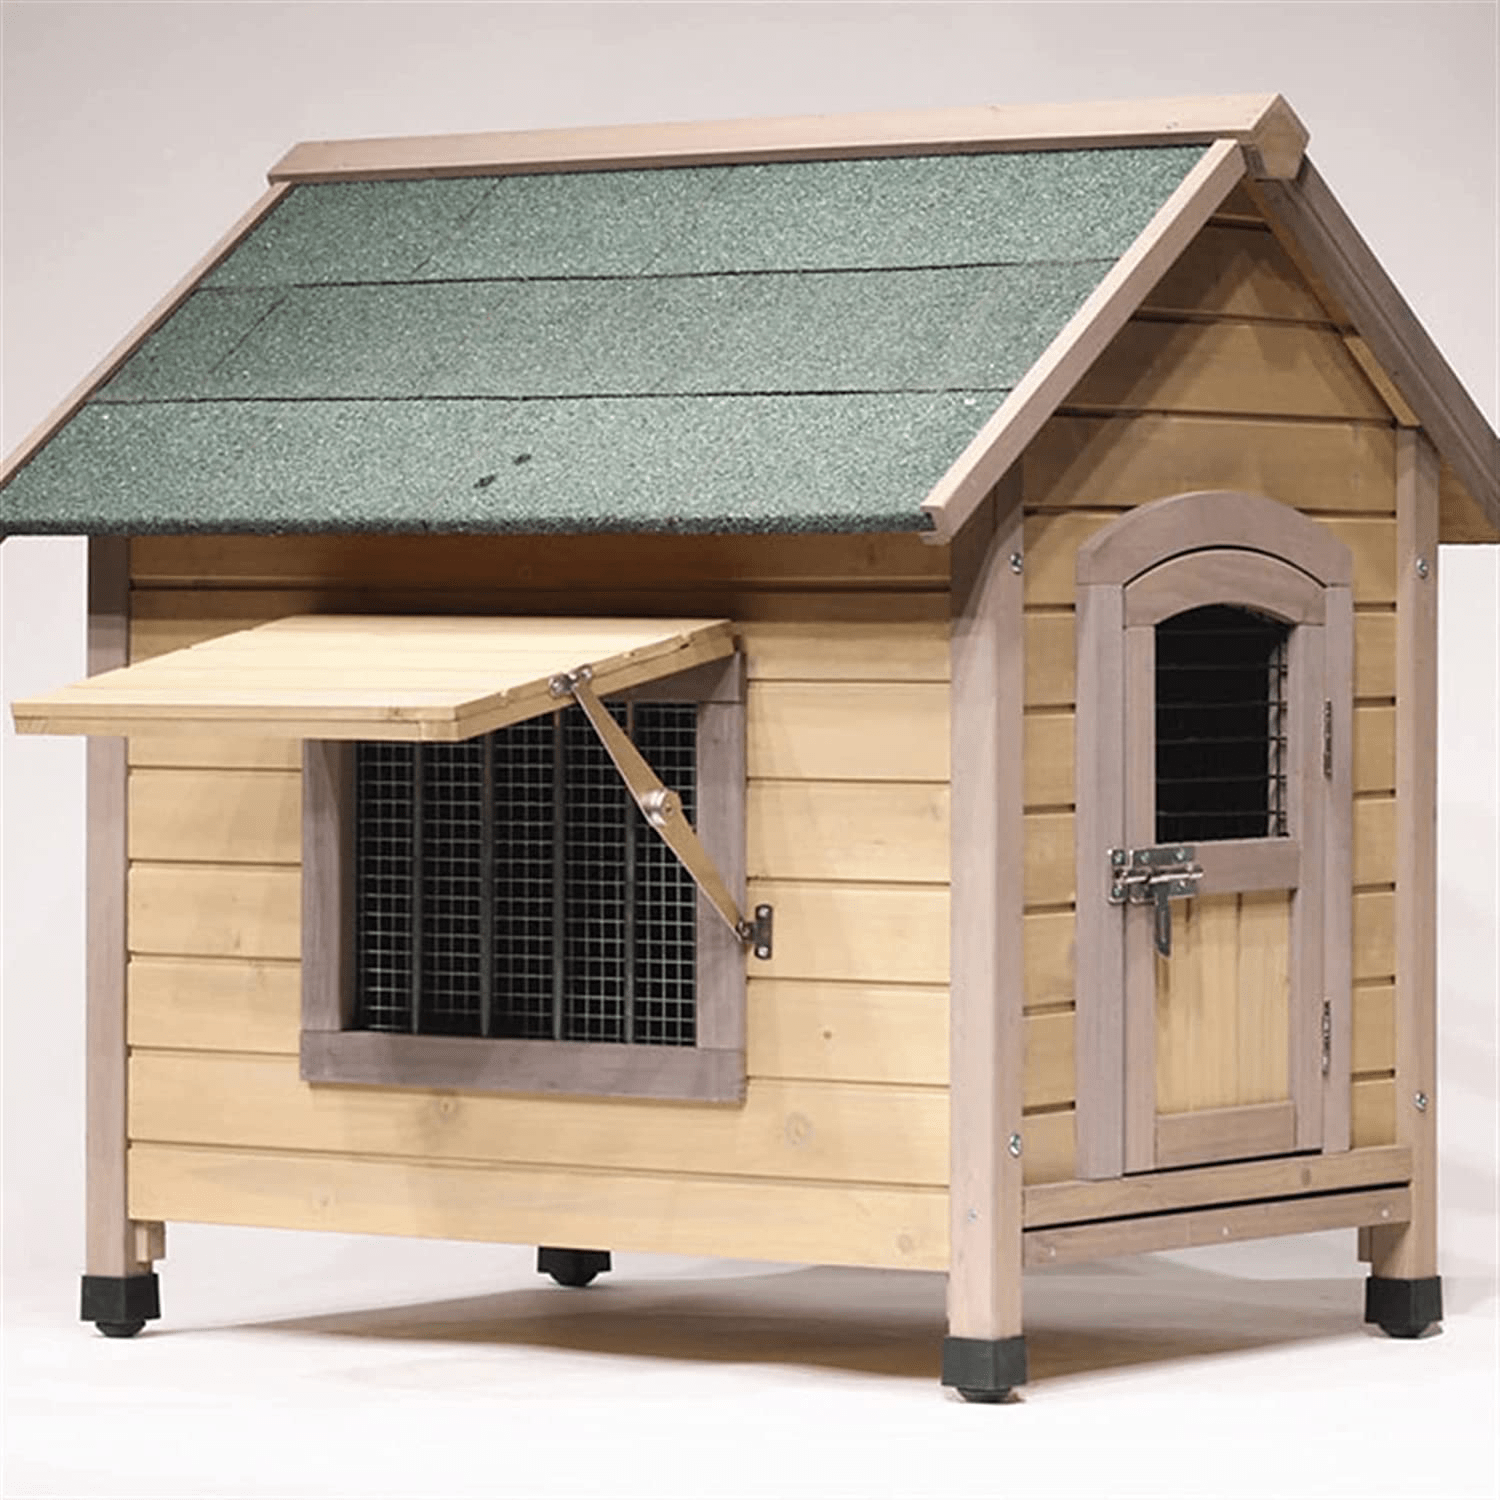 XLYYLM Small Medium and Large Kennels Are Weatherproof Indoor and Outdoor Dog House with Door Pet House Outdoor Weatherproof and Cold-Proof Pet House Shelter Kennel Raised Floor Wooden Dog House Animals & Pet Supplies > Pet Supplies > Dog Supplies > Dog Houses XLYYLM   